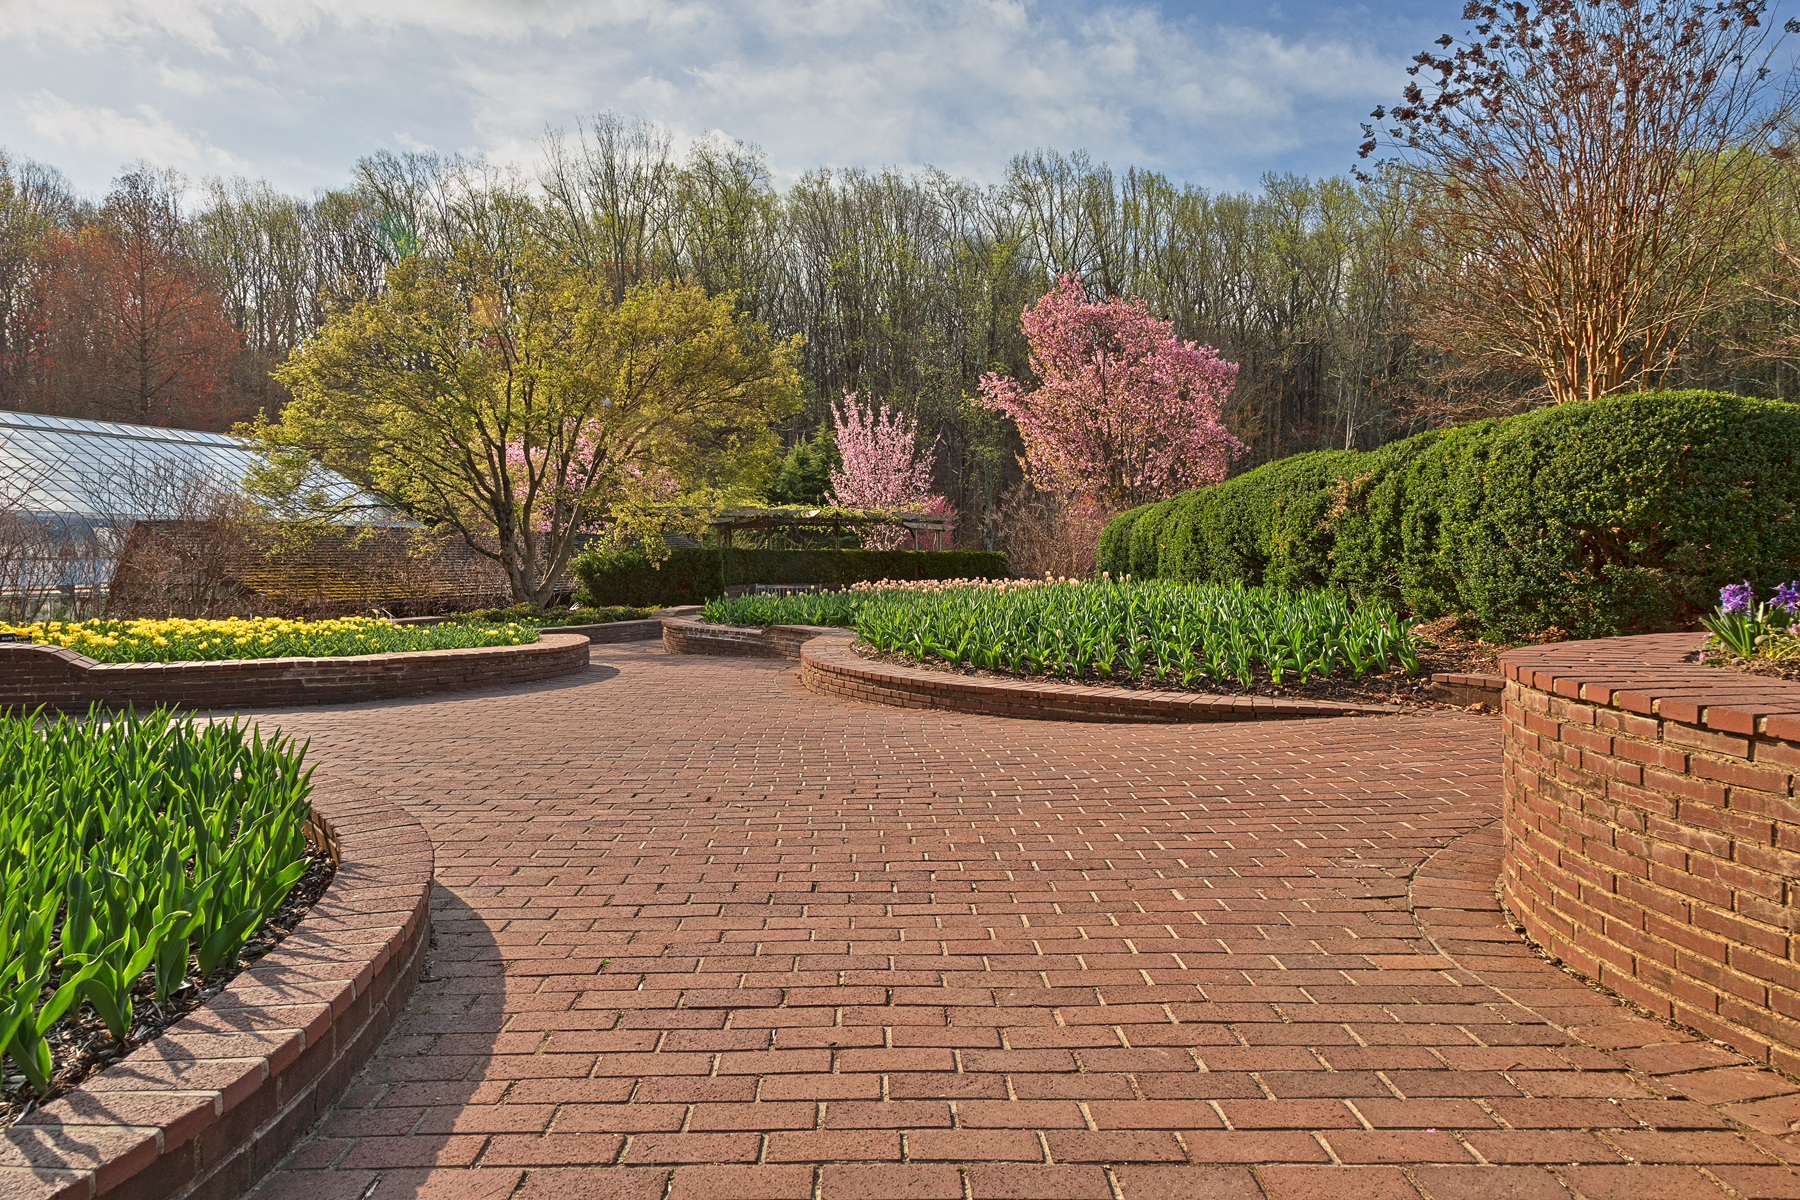 Brookside gardens - hdr photo